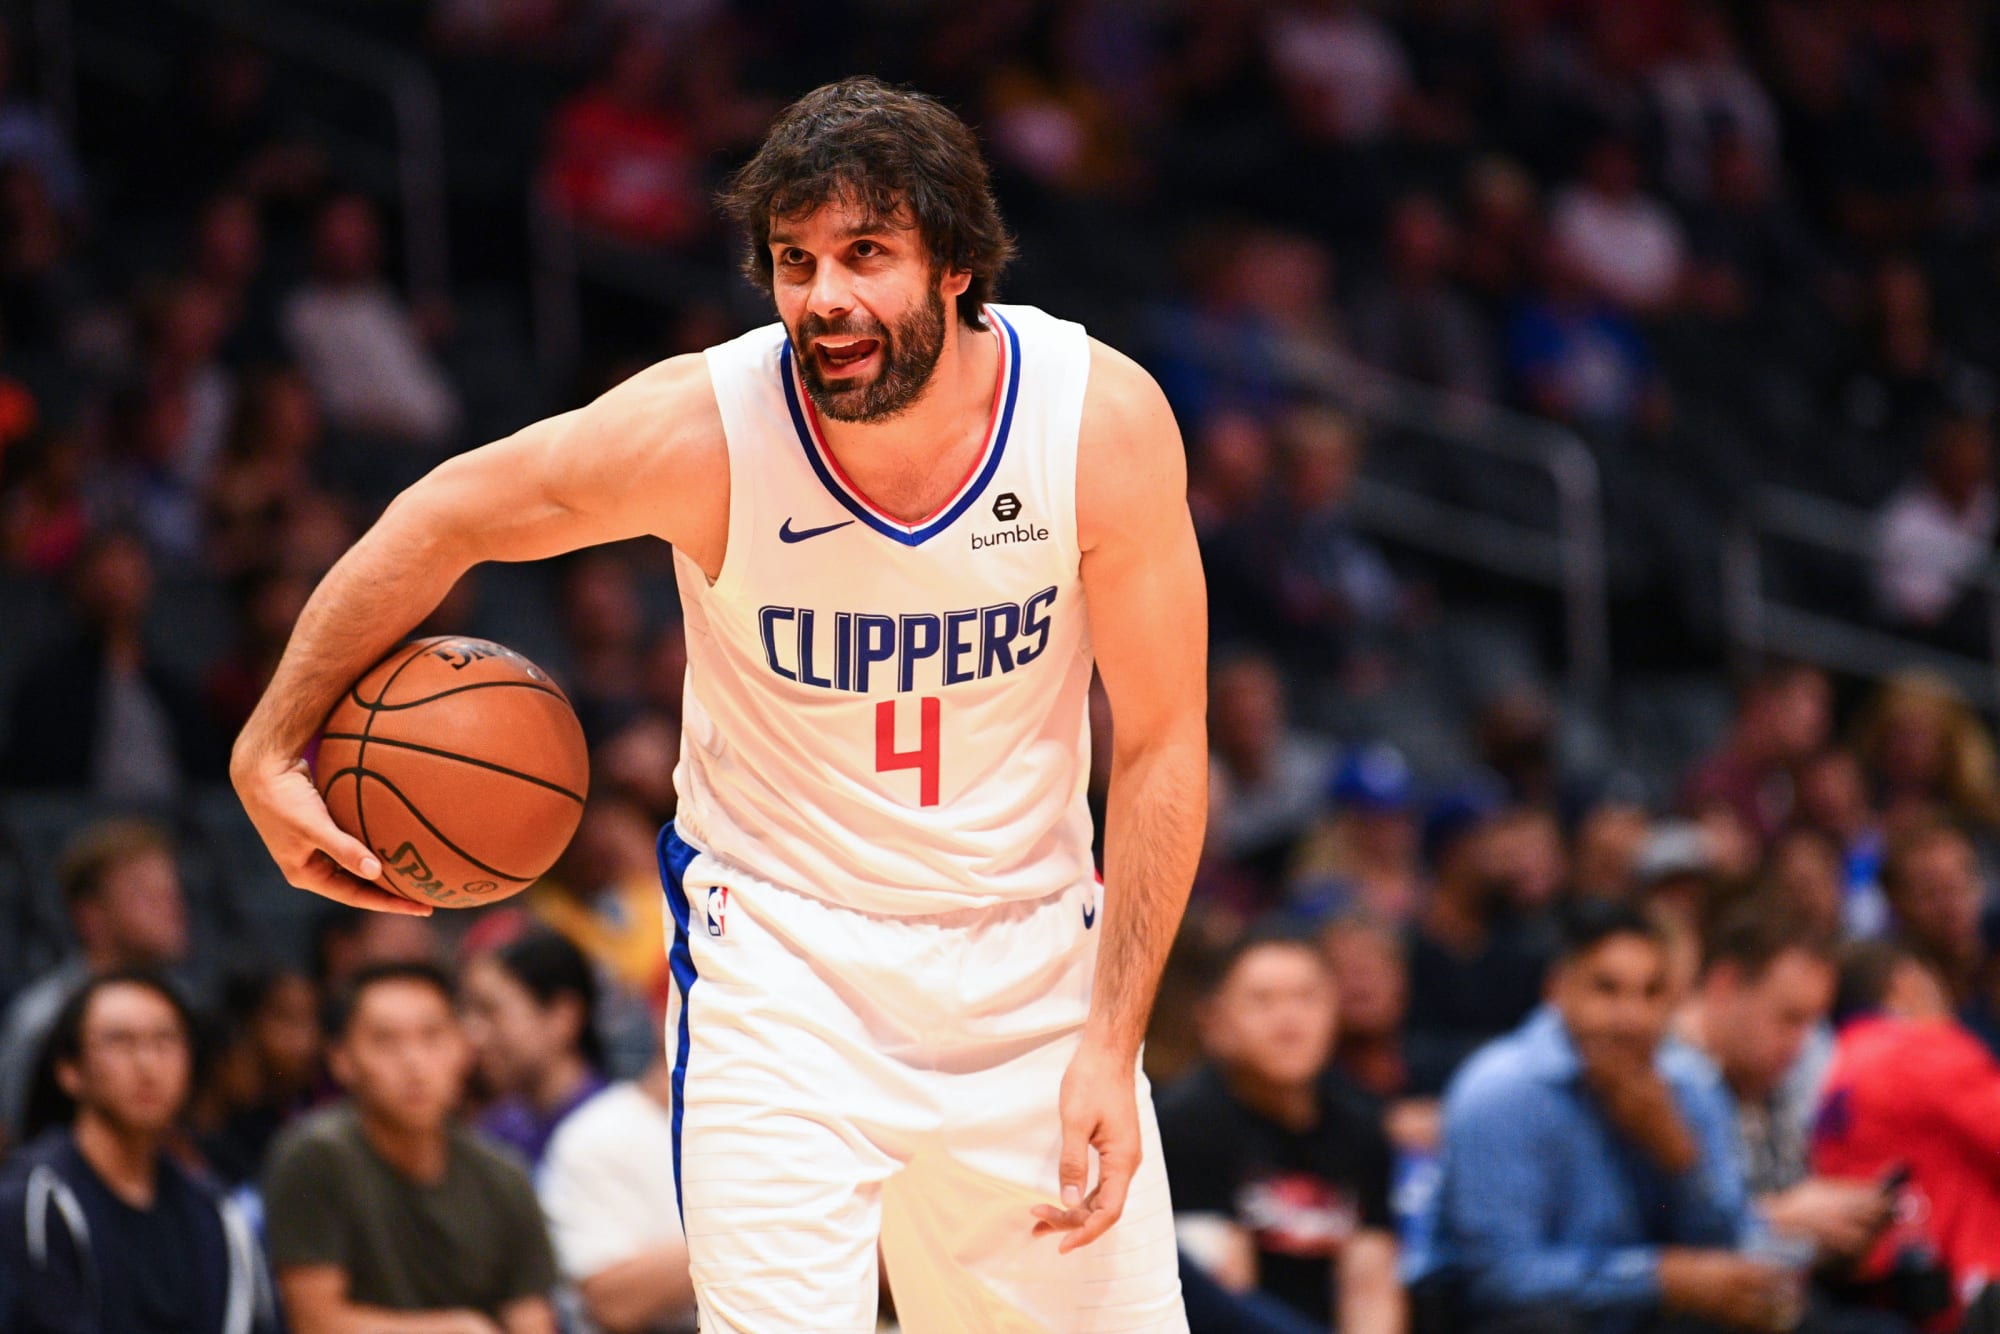 Locked on Clippers May 8: Milos Teodosic and the Lob City Clippers